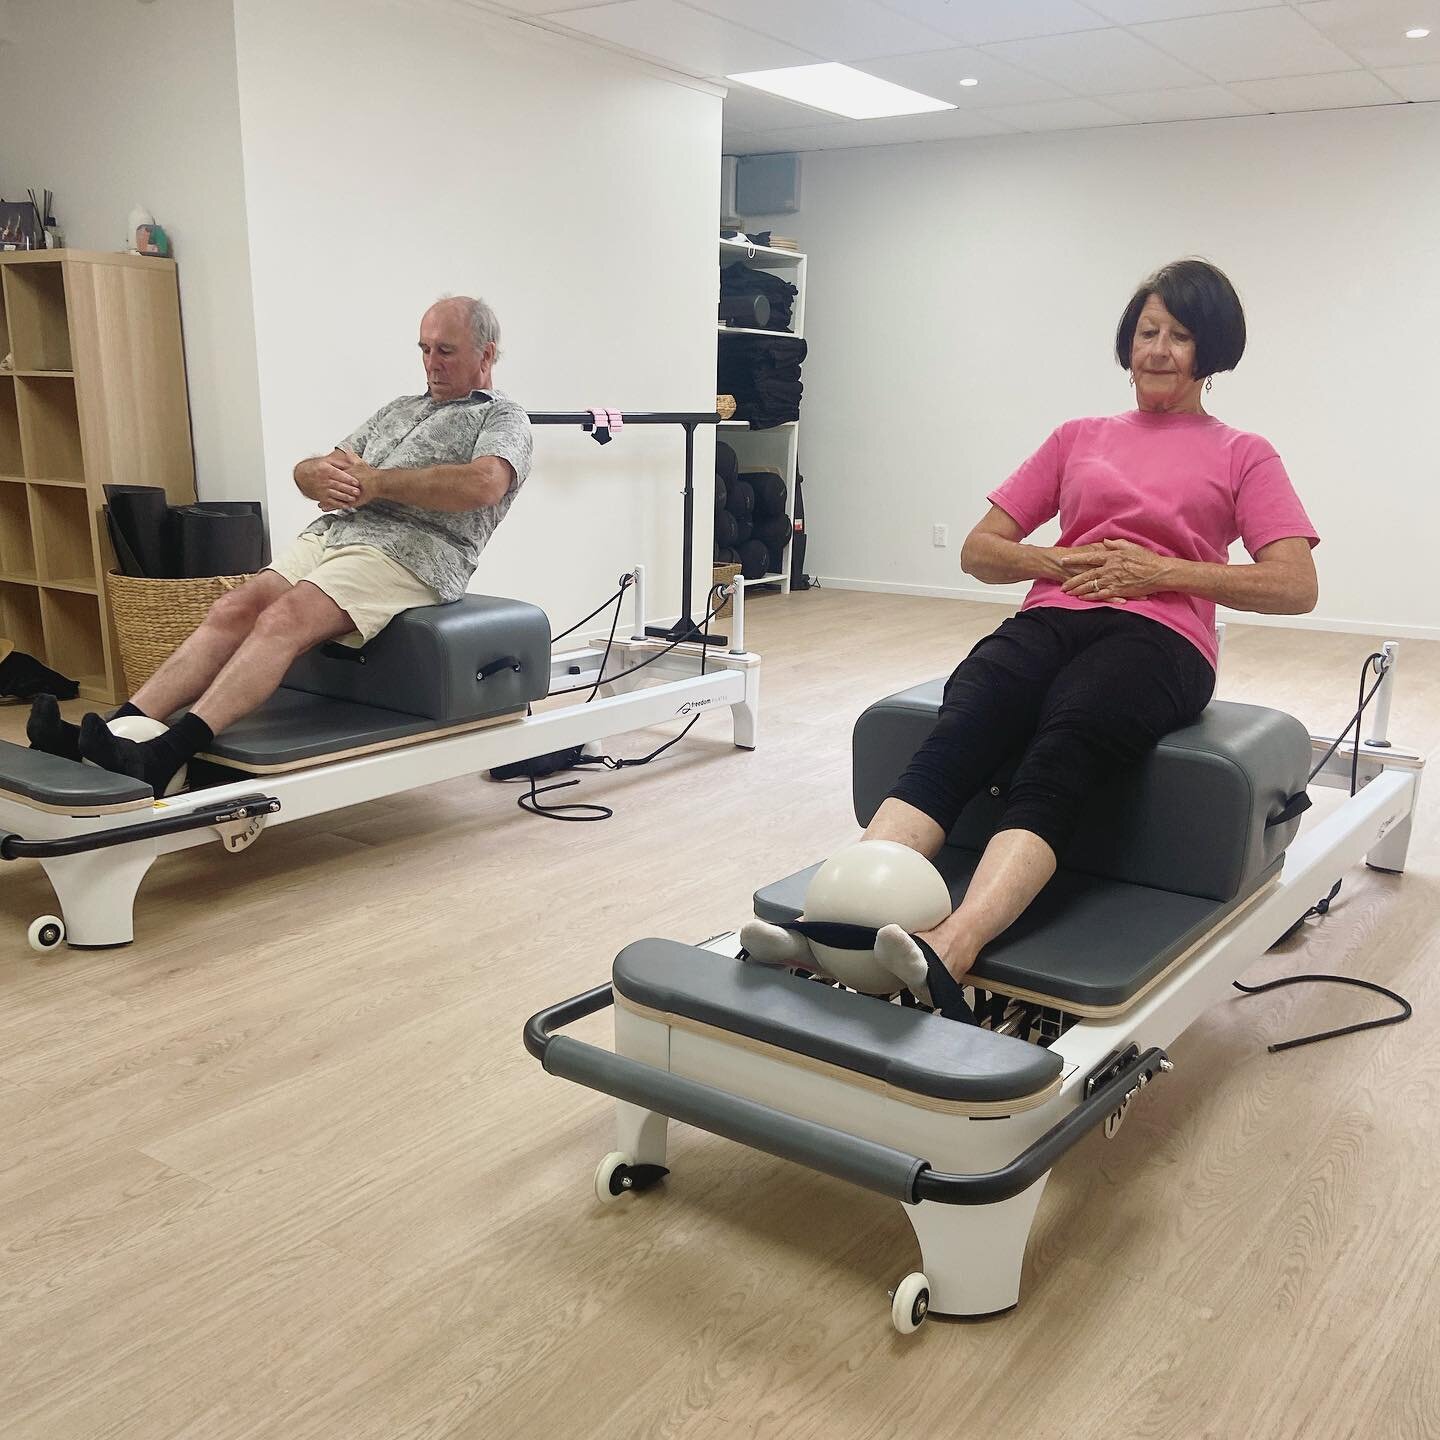 Anyone is welcome here @boutiqueballetpilates ! 😁

Pictured are my 2 retired parents, they were practicing Round Back on the short box. I&rsquo;m so happy they have found Pilates a beneficial way to help keep them moving well and active! 

About the